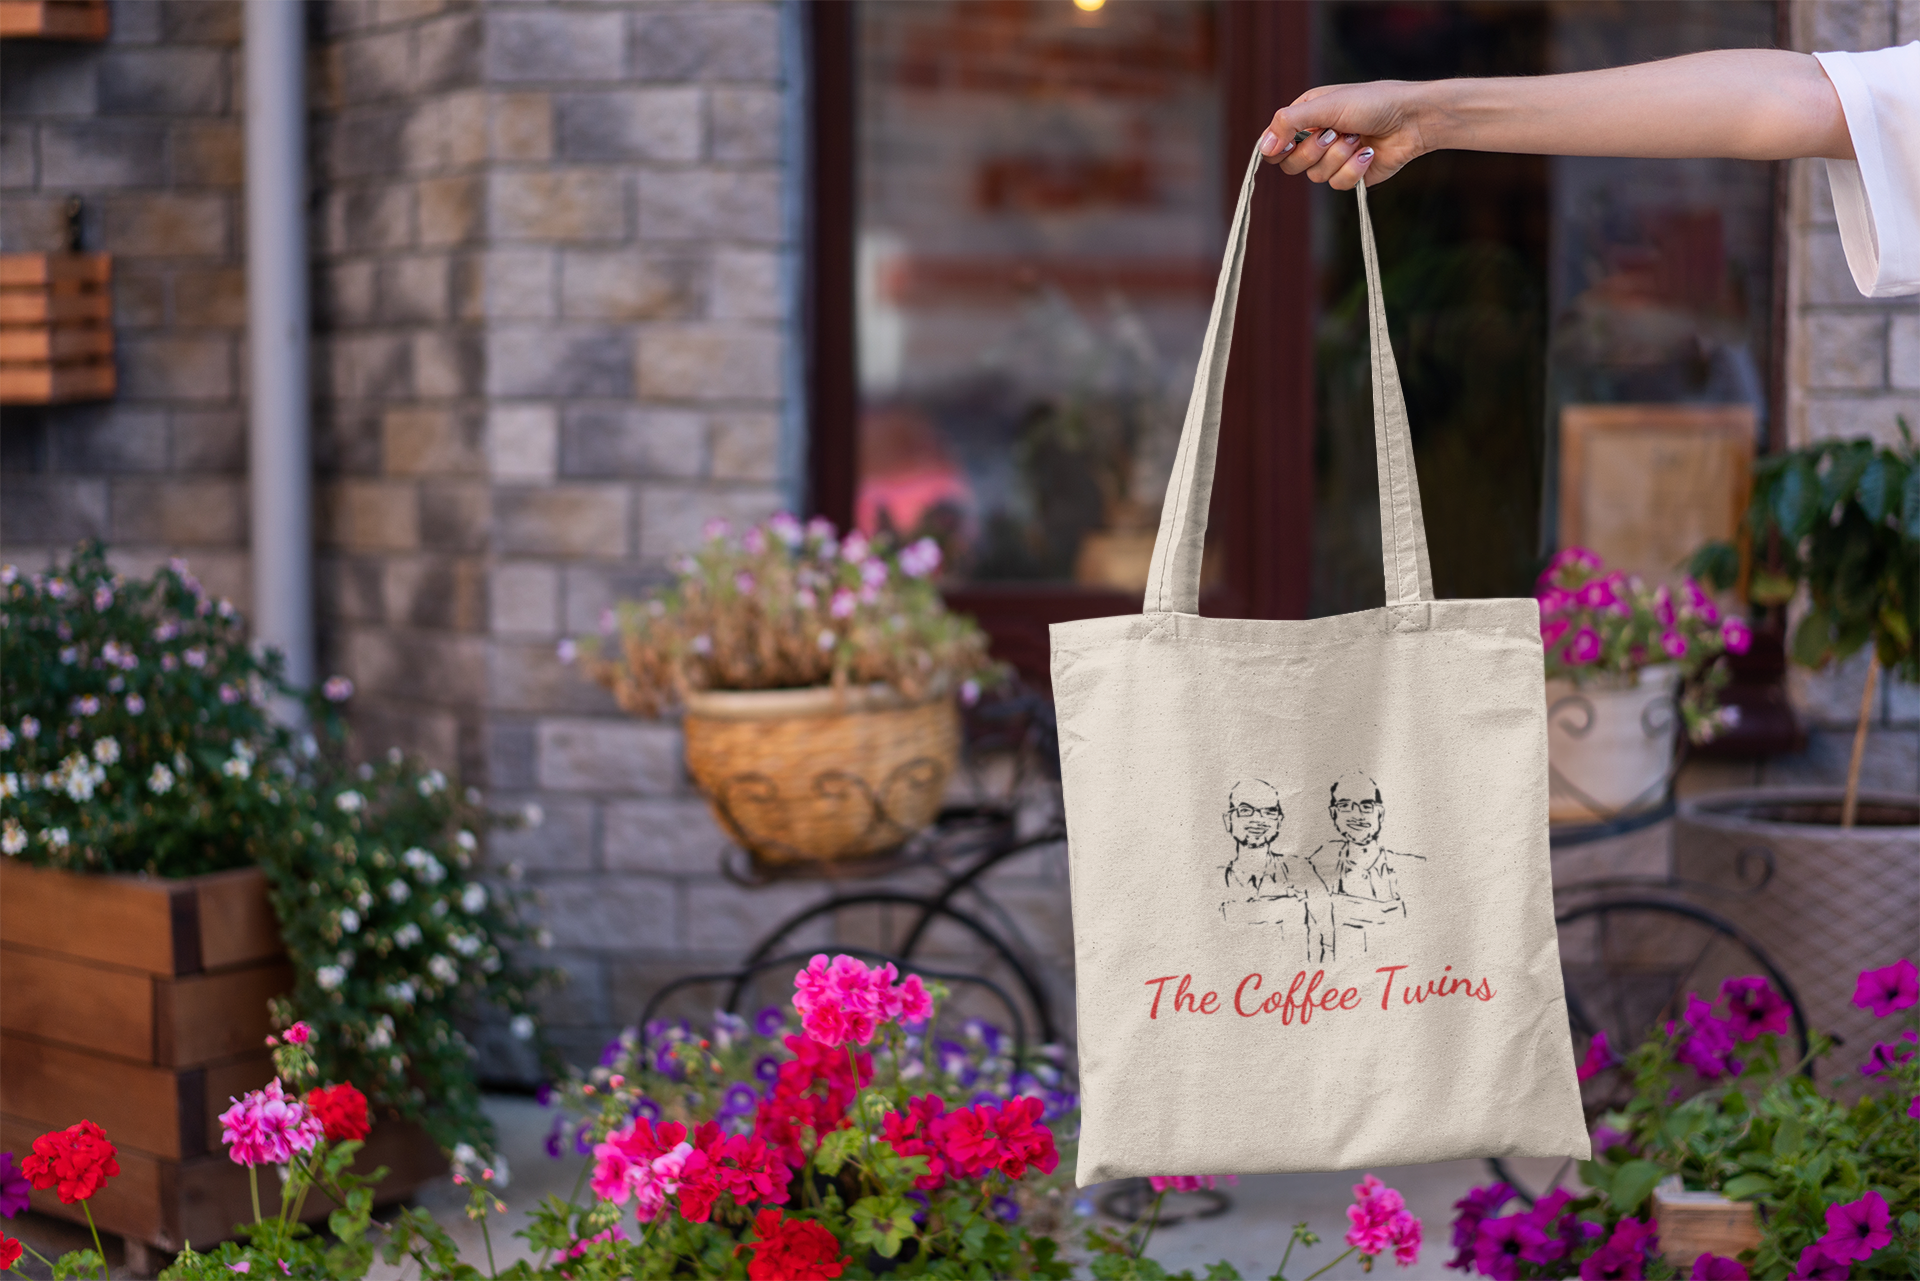 Branded Tote Bag (thecoffeetwins.com)